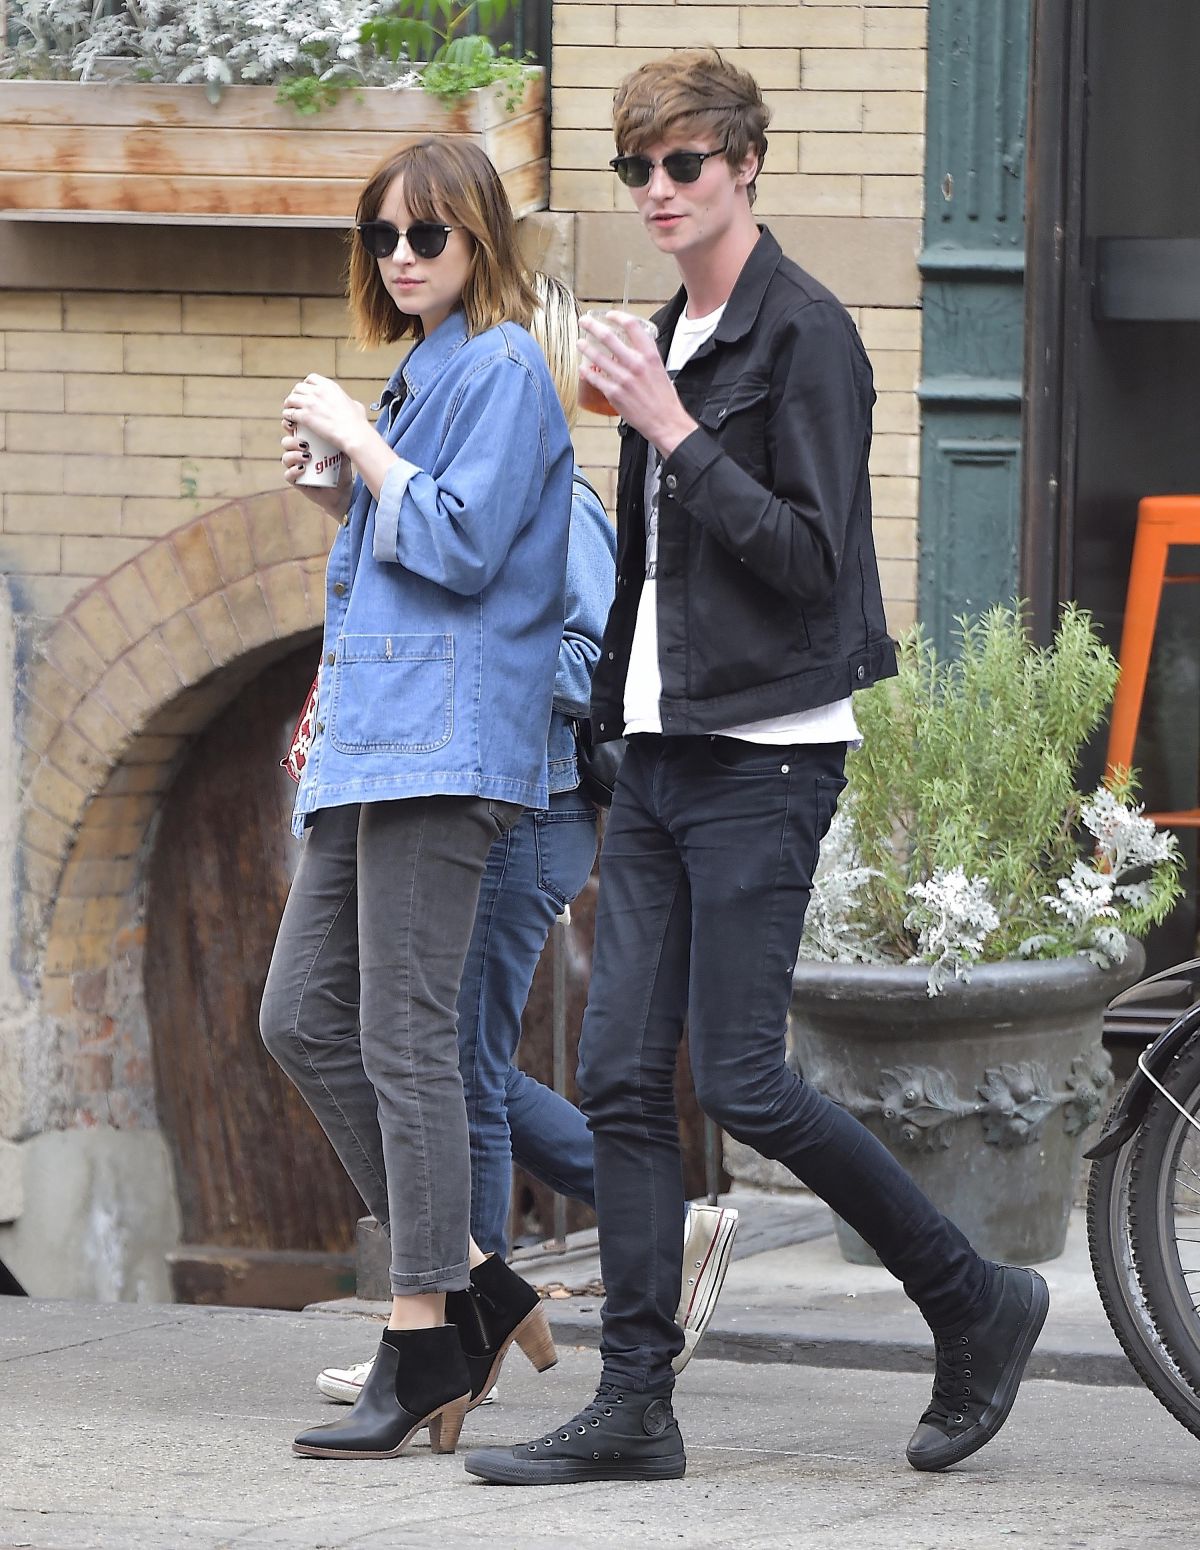 DAKOTA JOHNSON Out and About in Soho 09/21/2015 – HawtCelebs